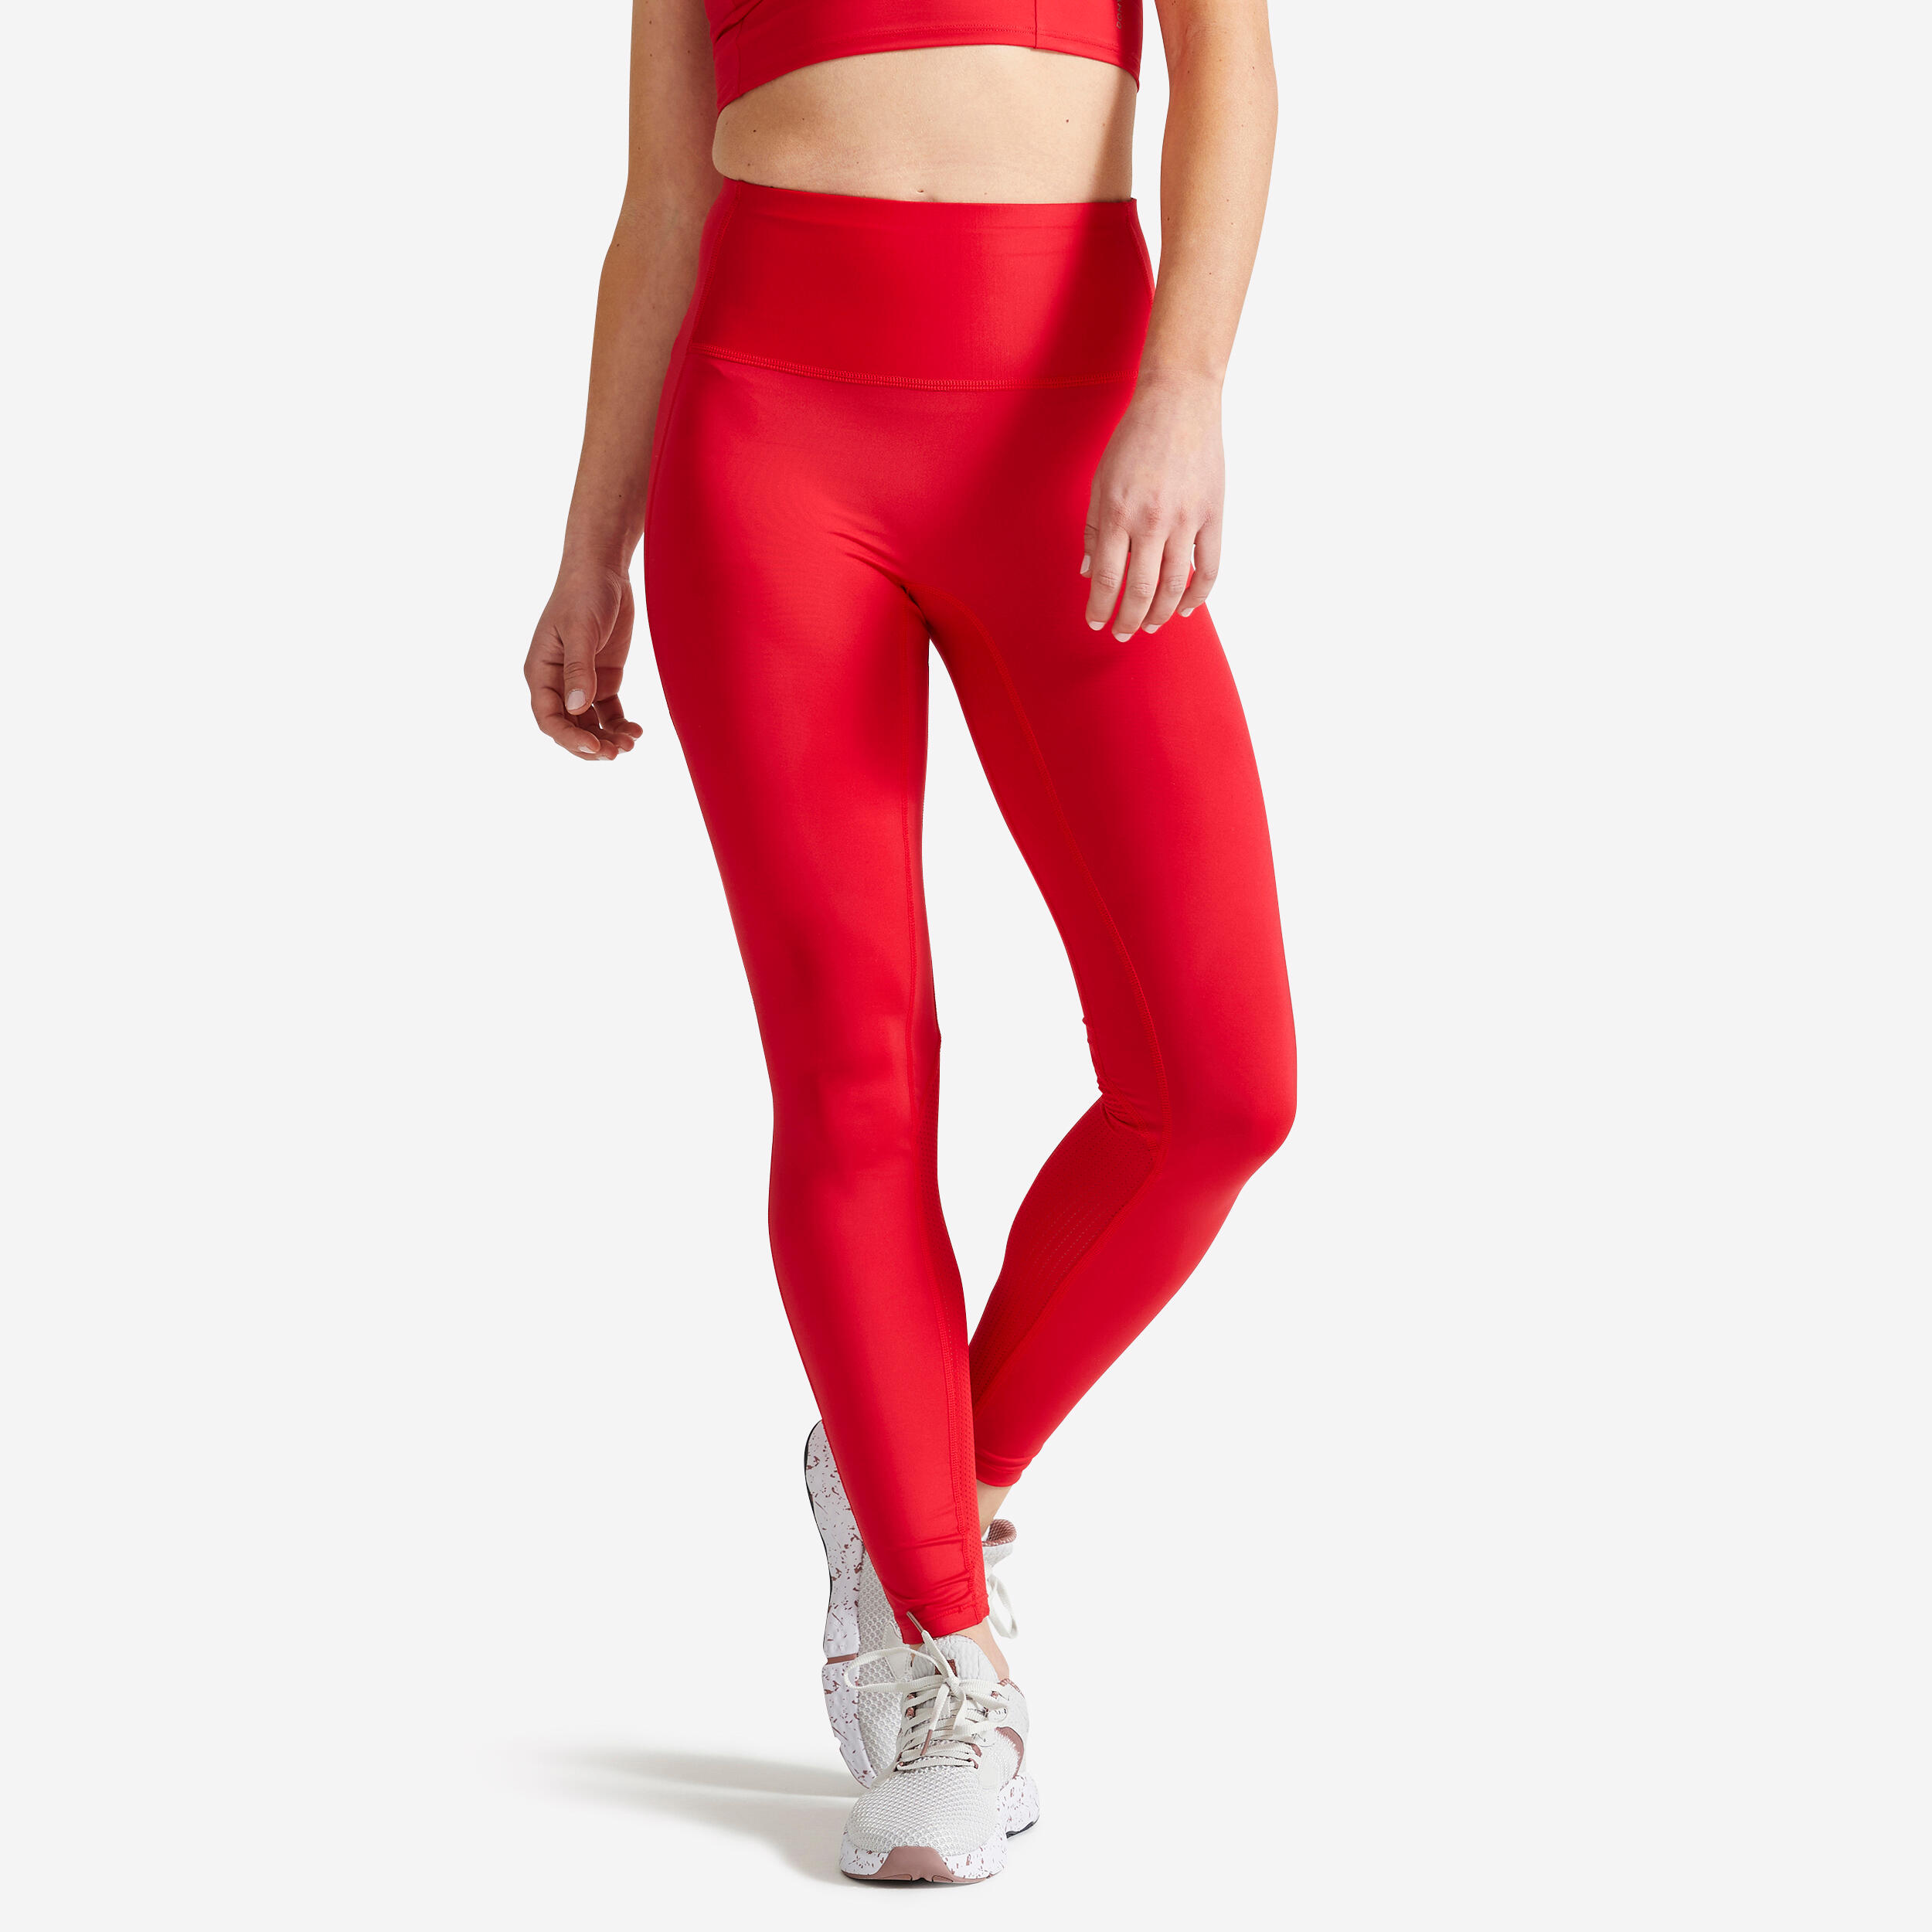 Women's High-Waisted Body-Shaping Fitness Cardio Leggings - Red